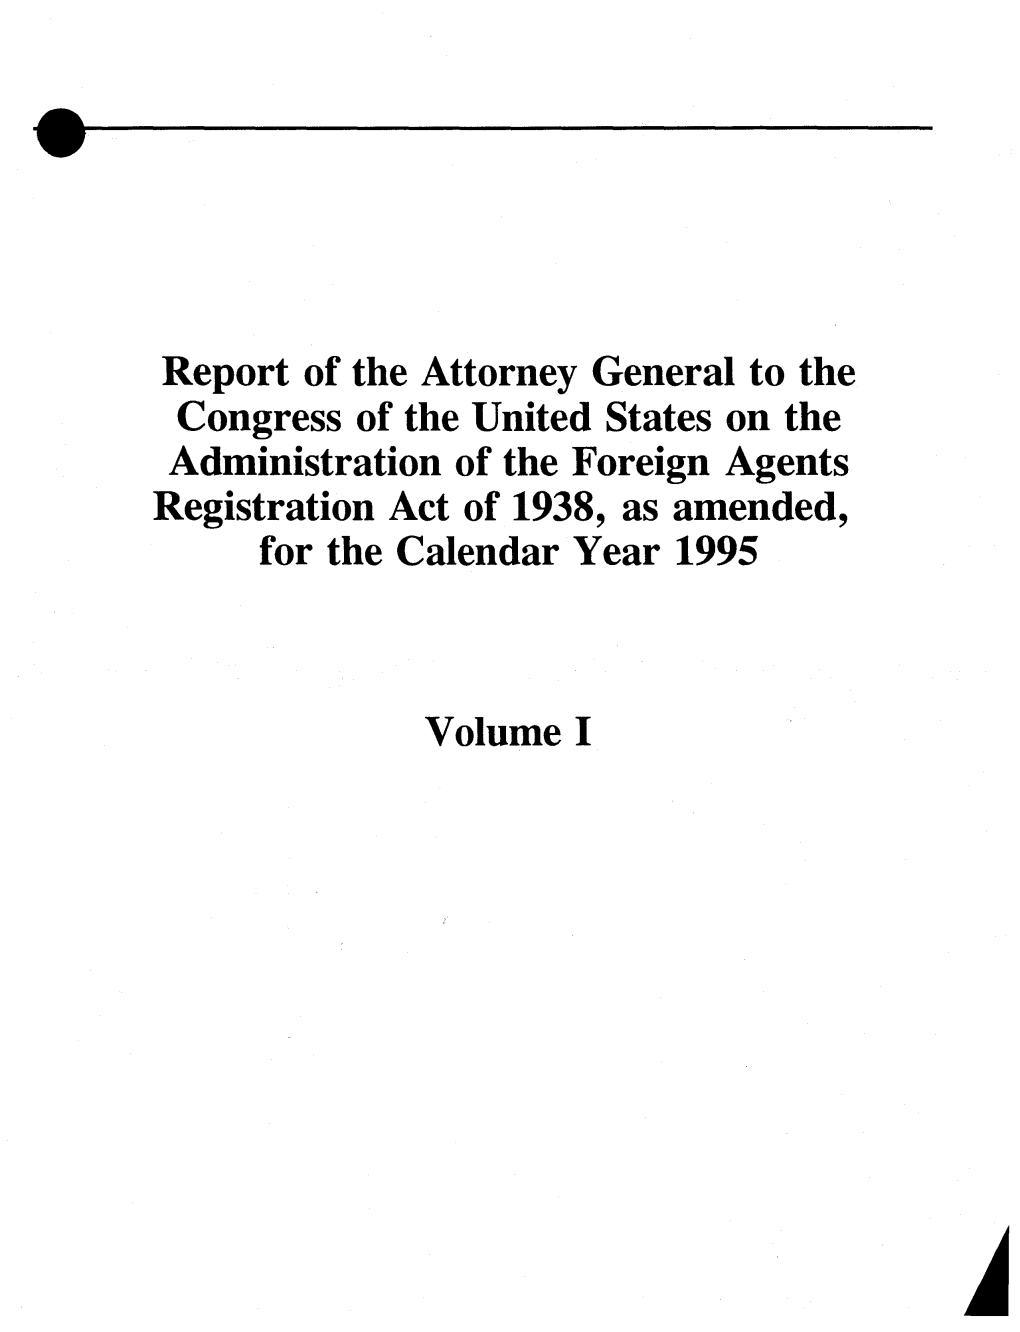 Report of the Attorney General to the Congress of the United States On